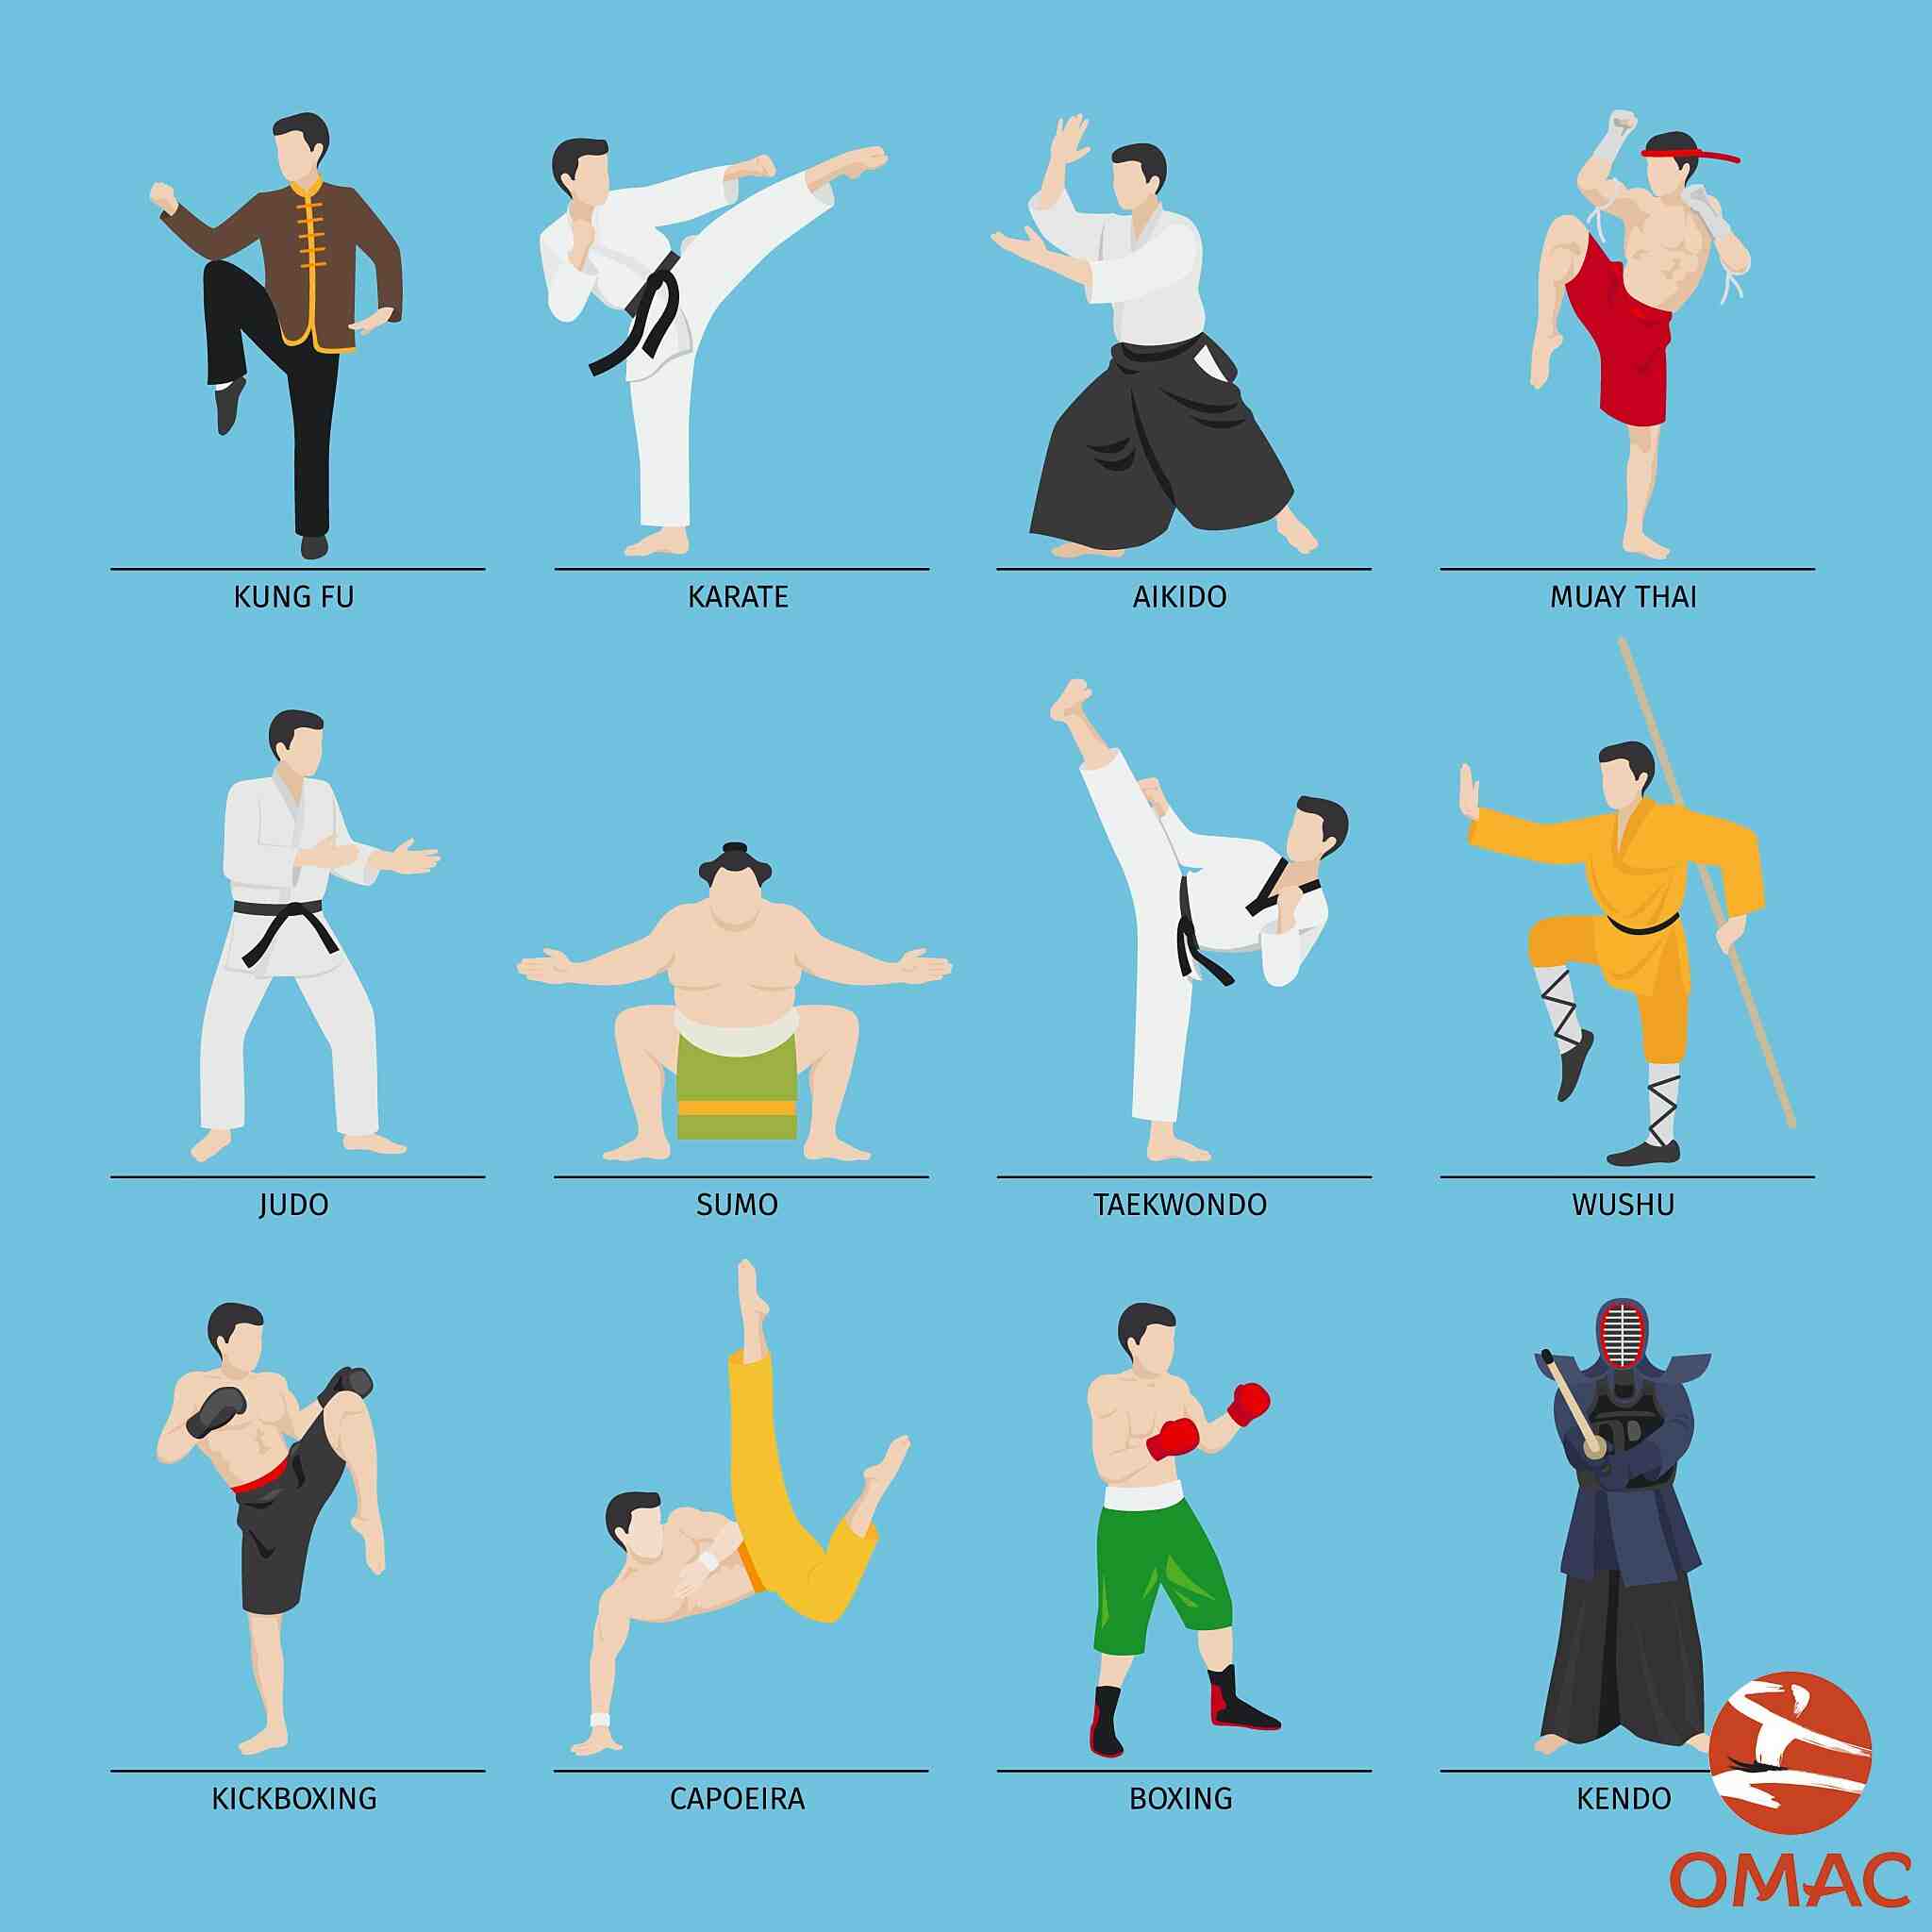 What are the different martial arts?